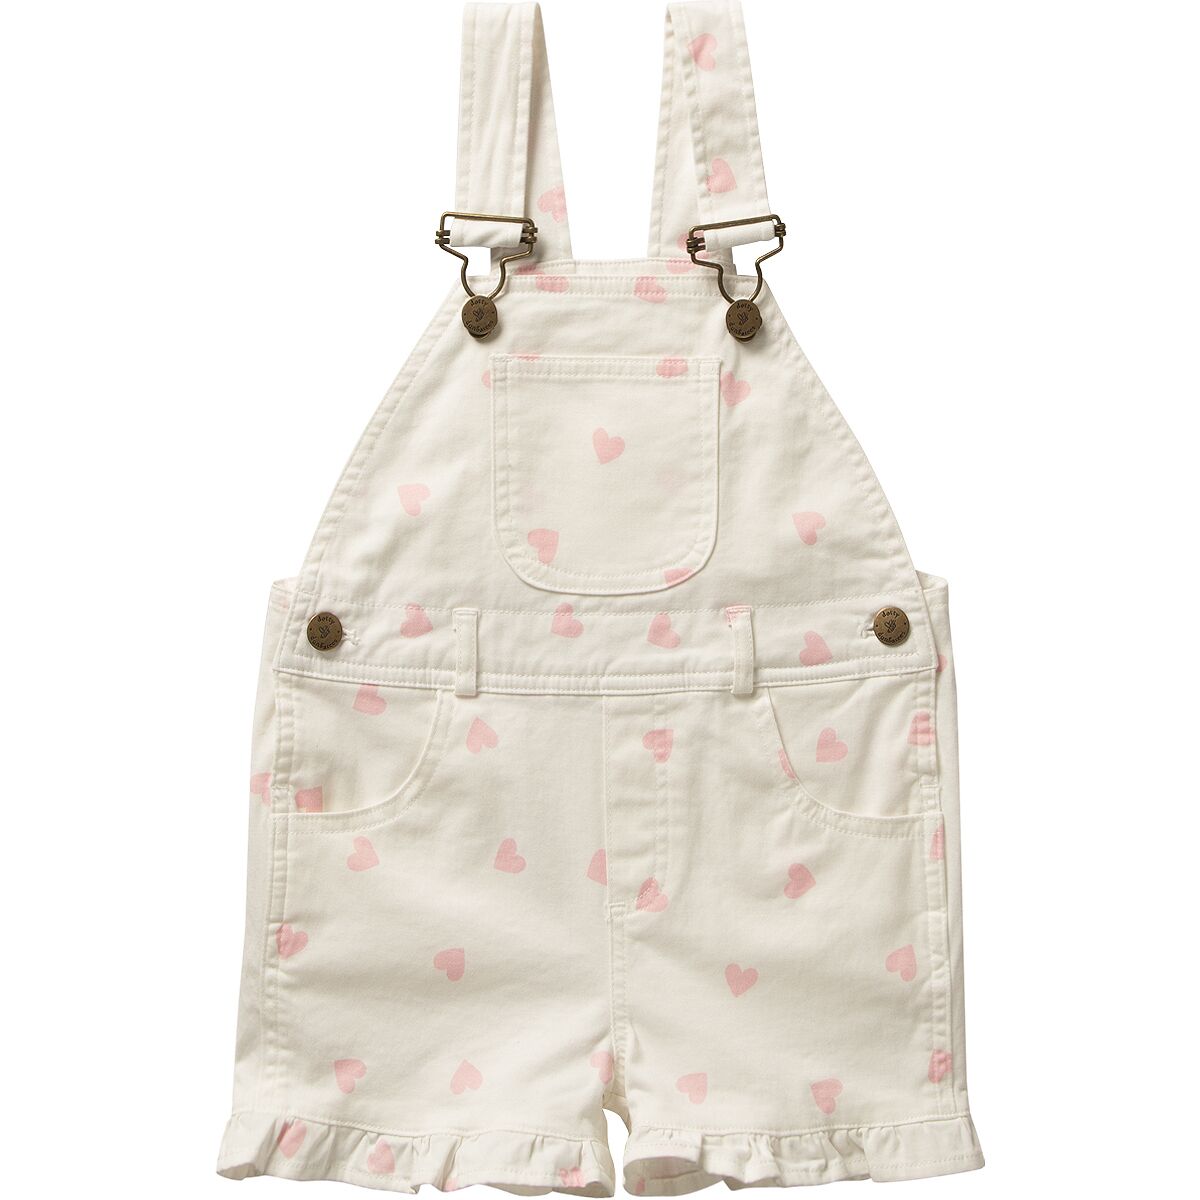 Dotty Dungarees Pink Heart Frill Short - Toddlers'